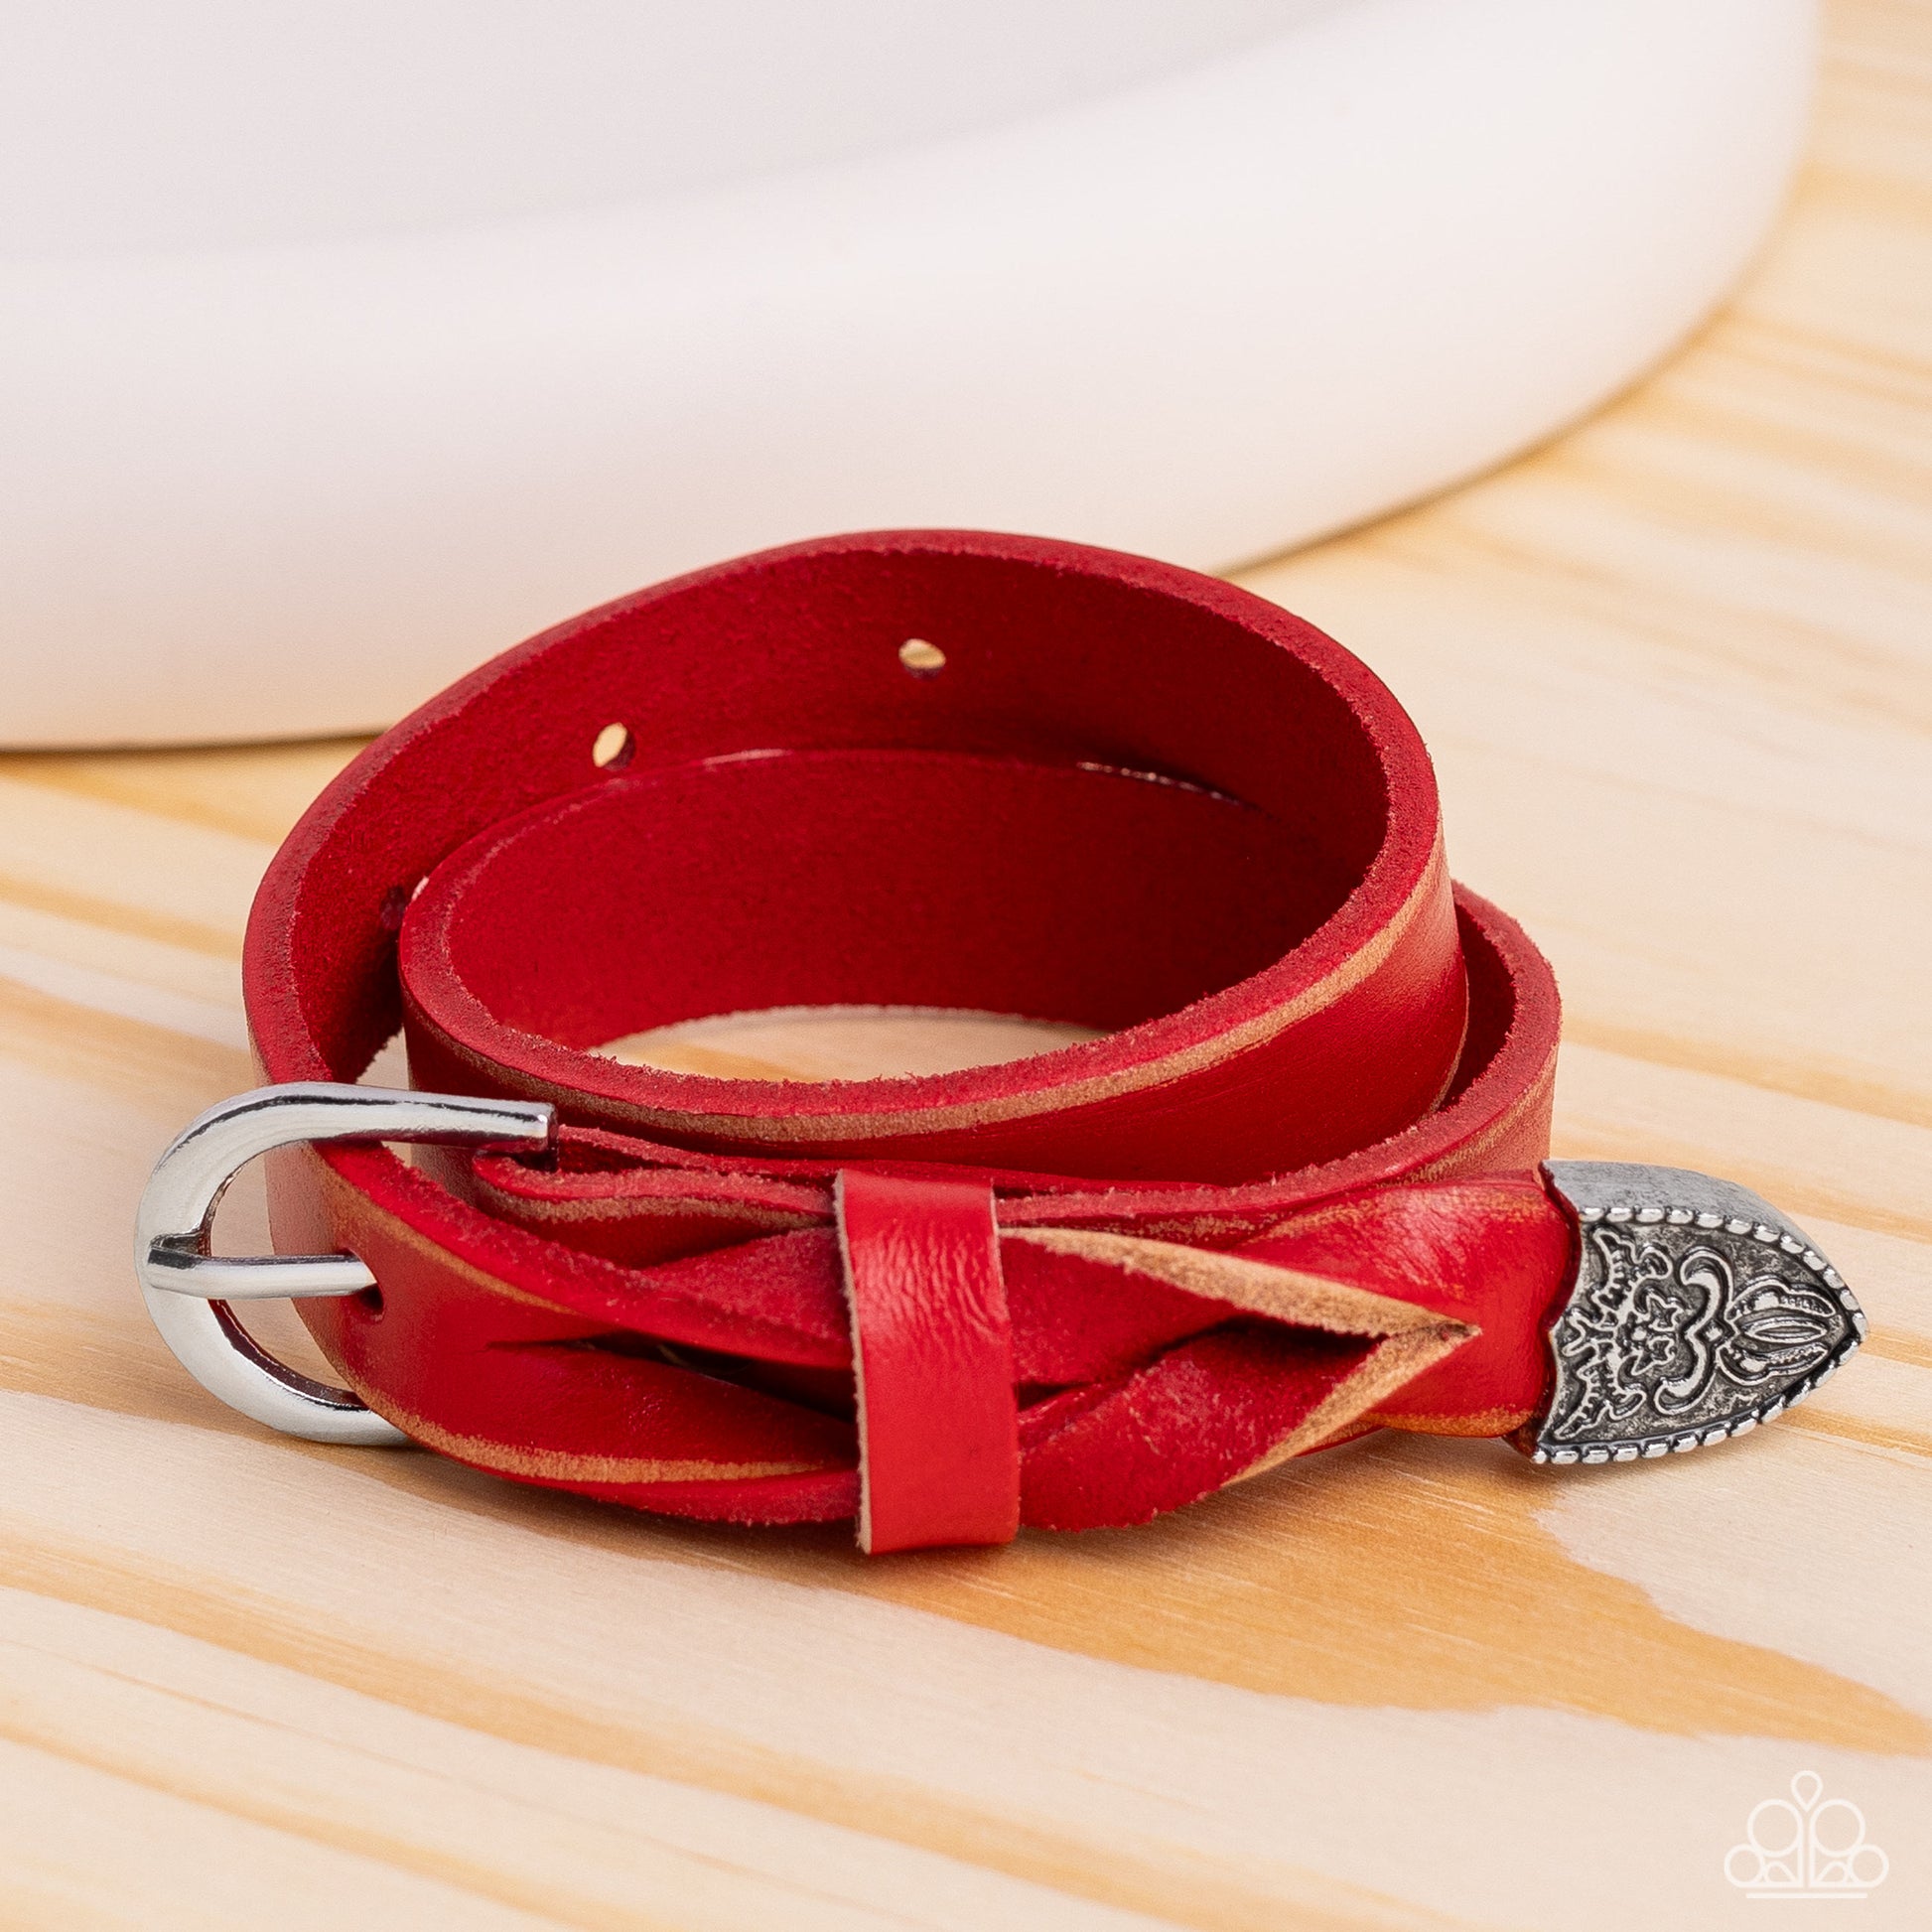 Featuring a weathered finish, a red leather band loops around the wrist in a belt loop fashion. Featured at the end of the loop, the leather braids into a silver cap fitting, embossed with a coat of arms style filigree for an urban statement. Features an adjustable belt loop closure.   Featured inside The Preview at Made for More! Sold as one individual bracelet.